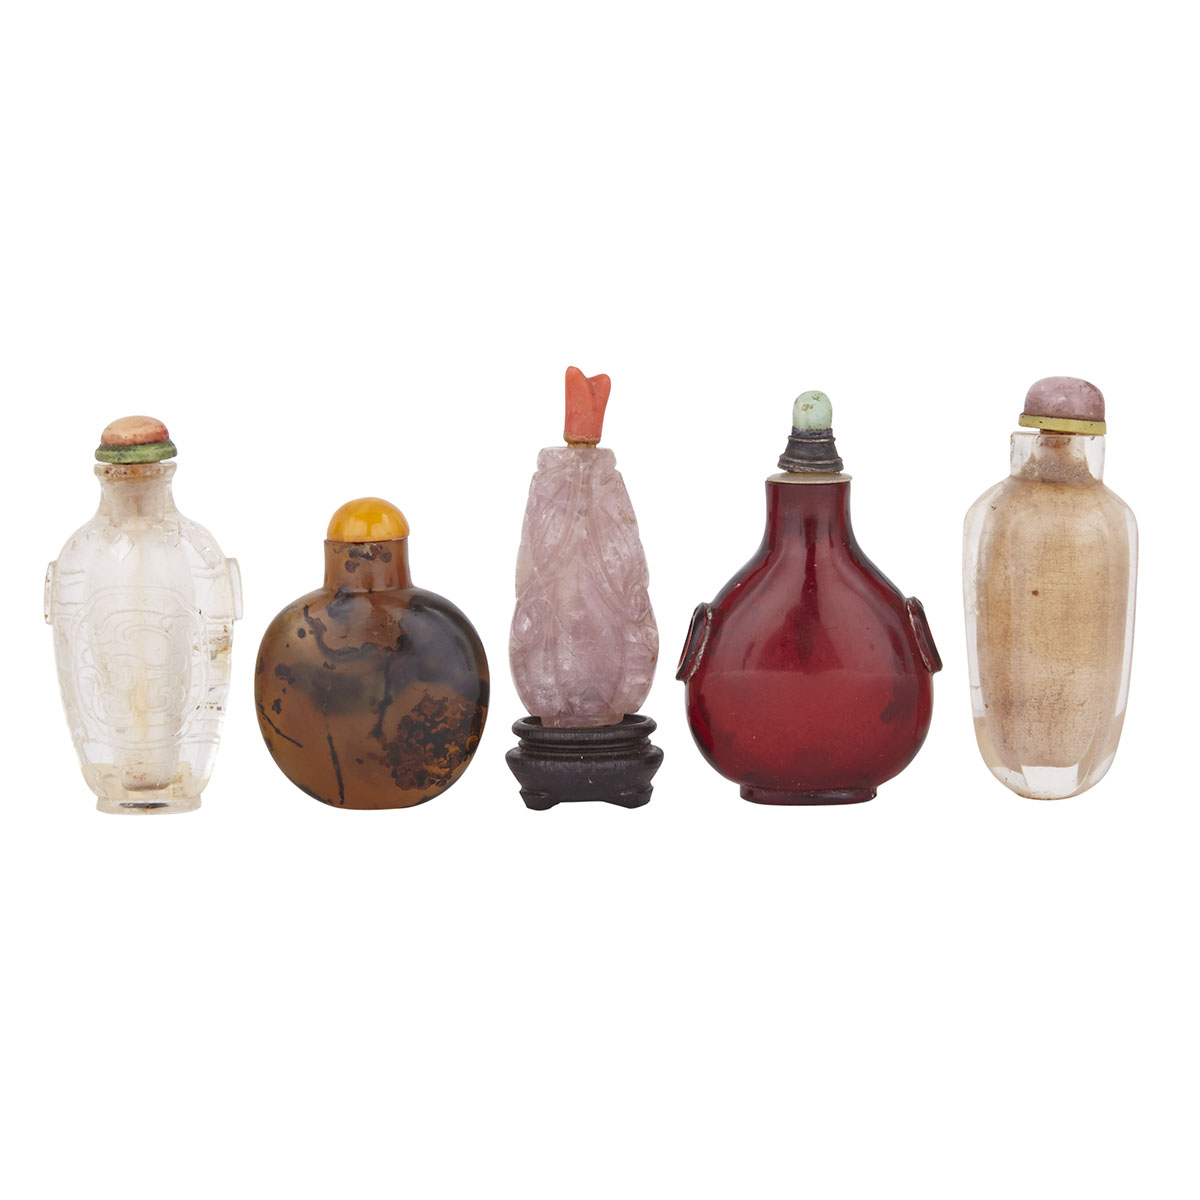 Group of Five Snuff Bottles, 19th to 20th Century